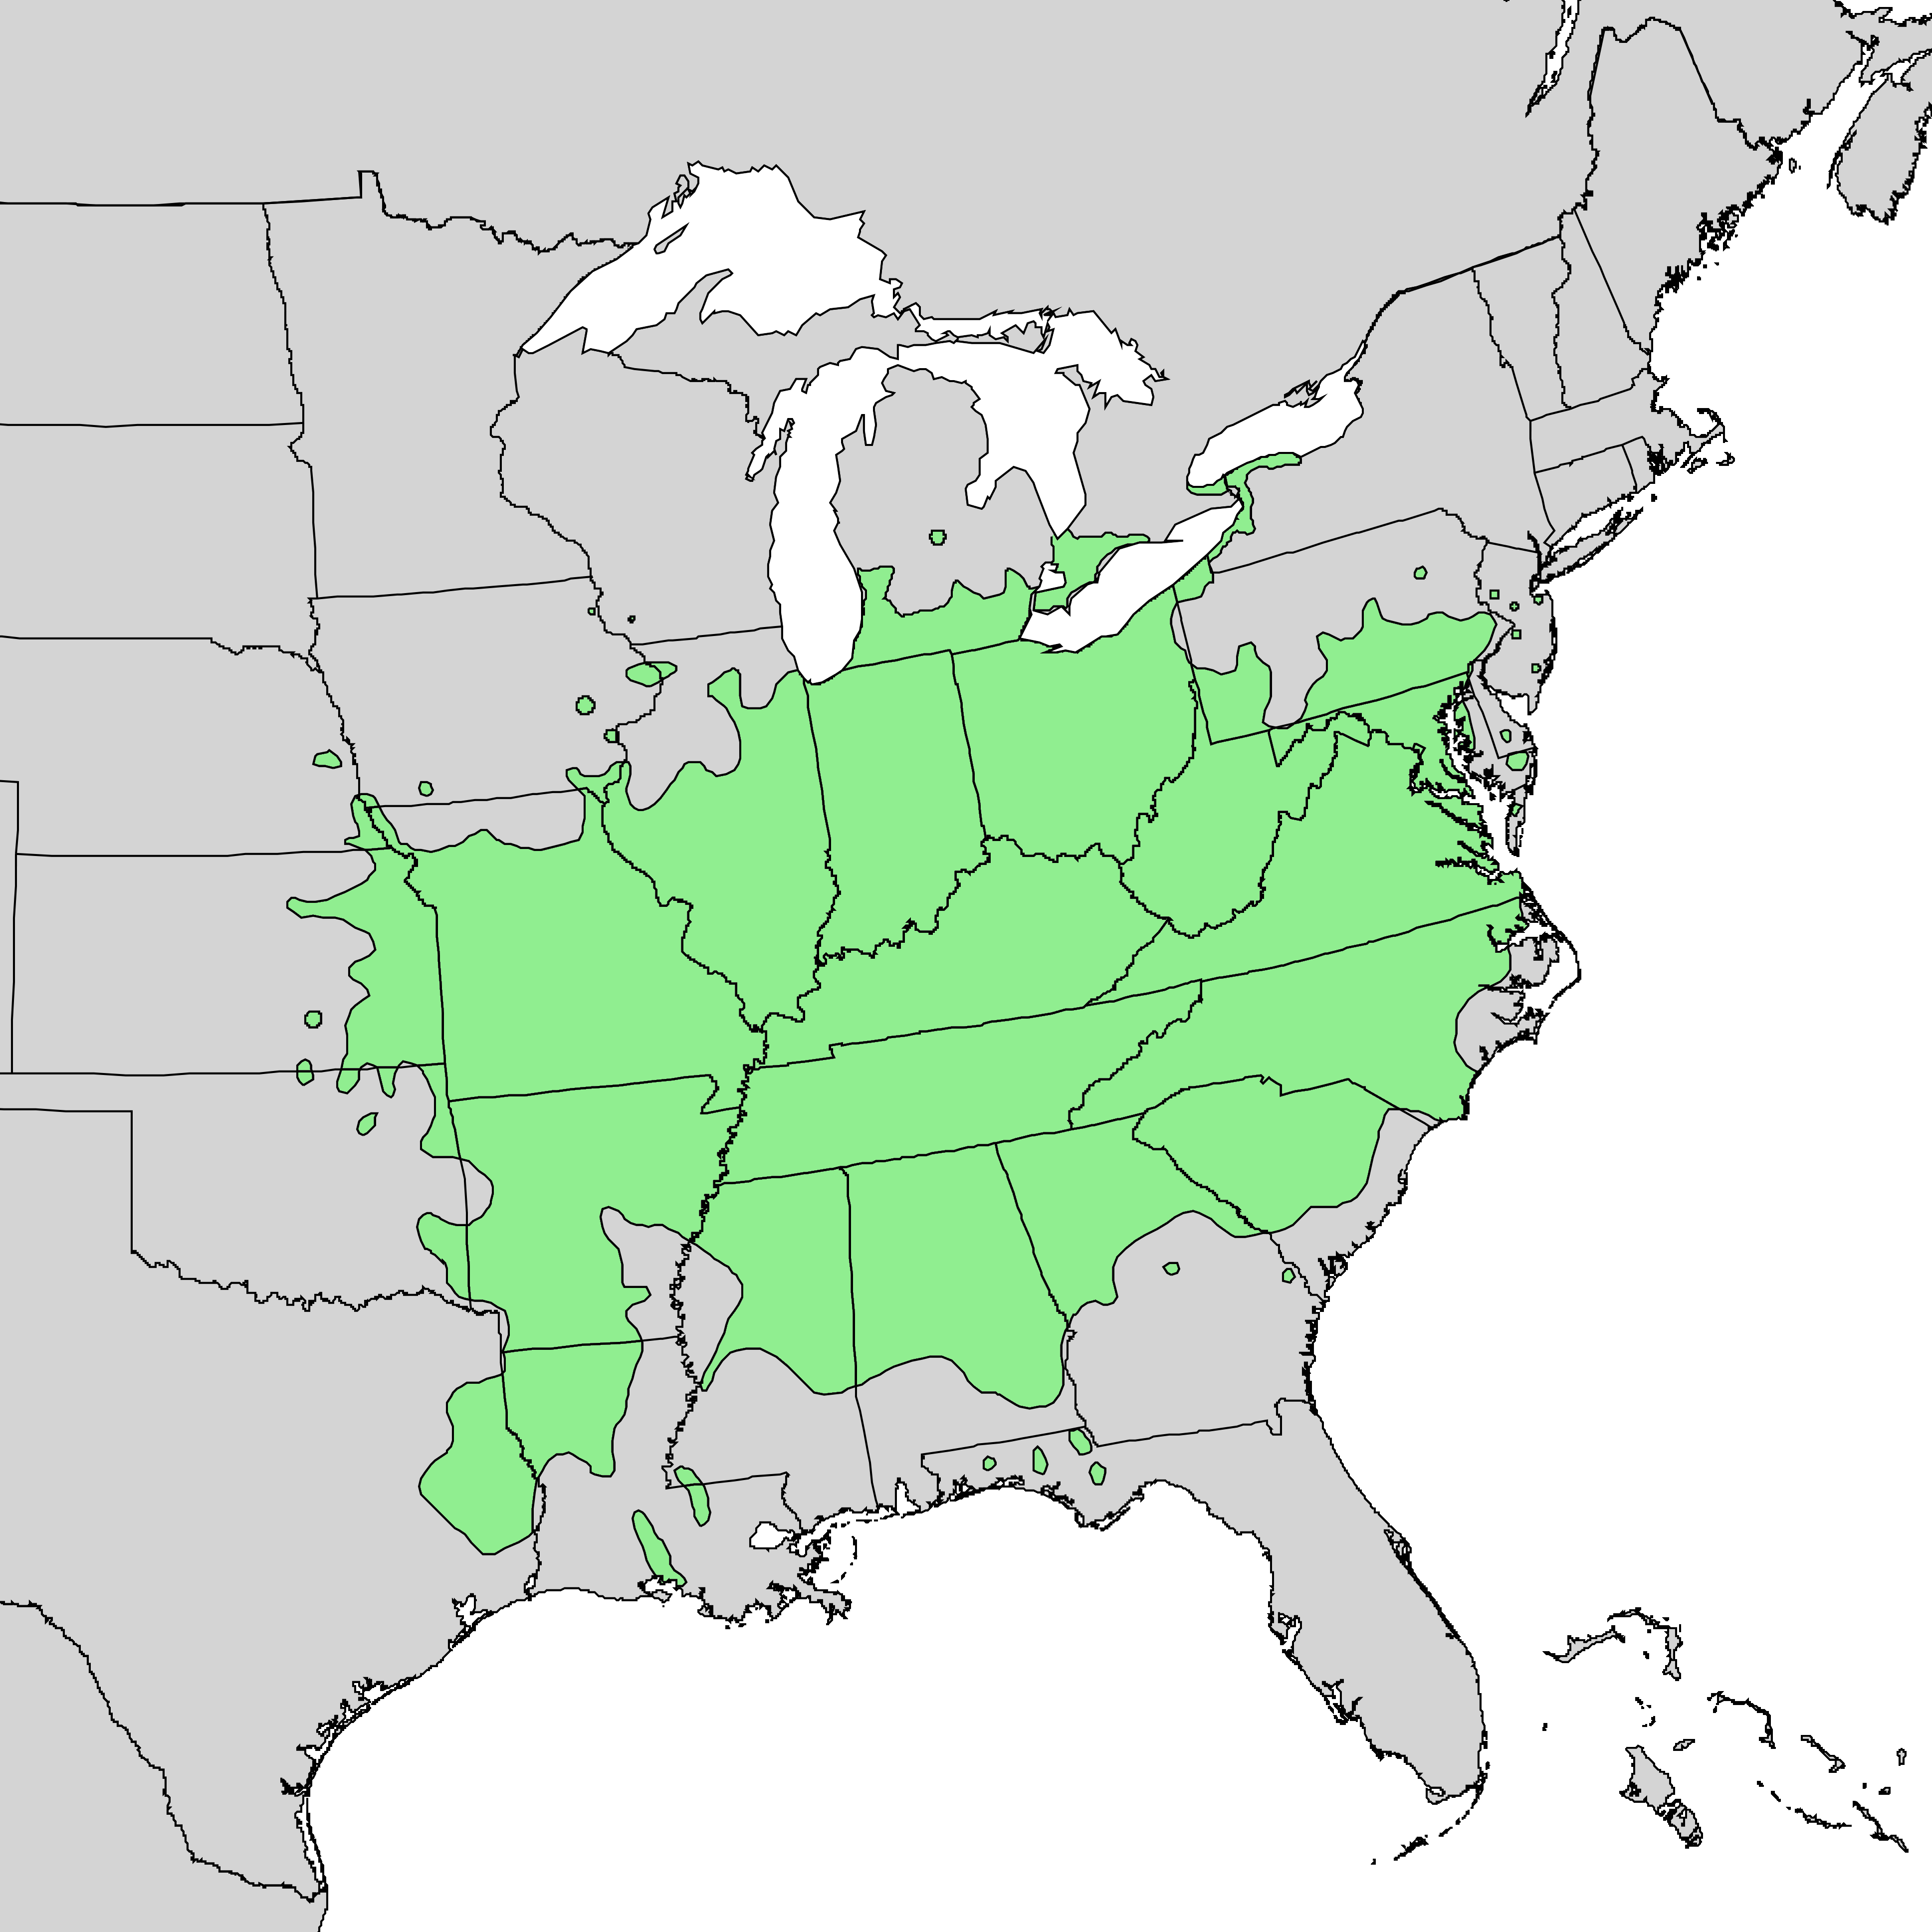 Natural distribution map for Asimina triloba, from "Atlas of United States Trees" by Elbert L. Little, Jr.